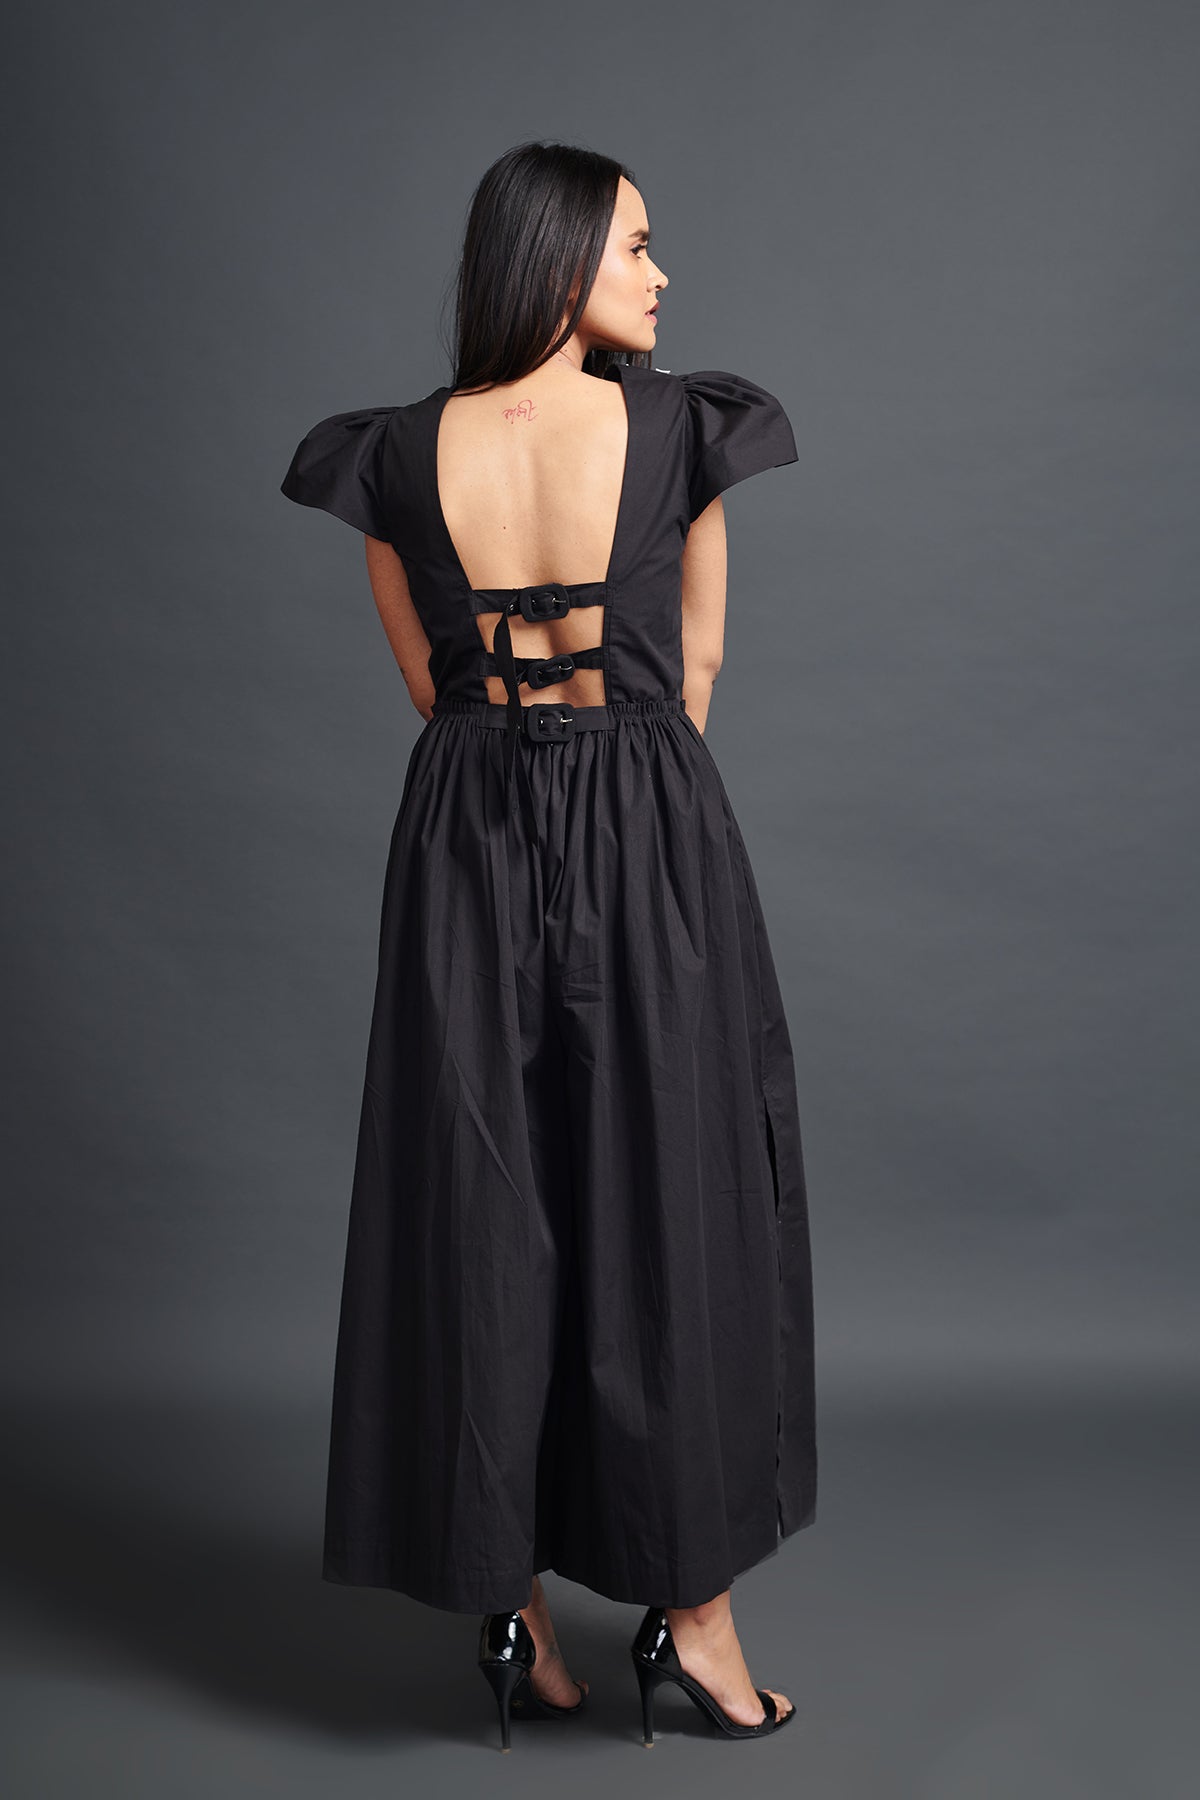 Image of BLACK BACKLESS JUMPSUIT IN COTTON BASE WITH CUTWORK EMBROIDERY. From savoirfashions.com